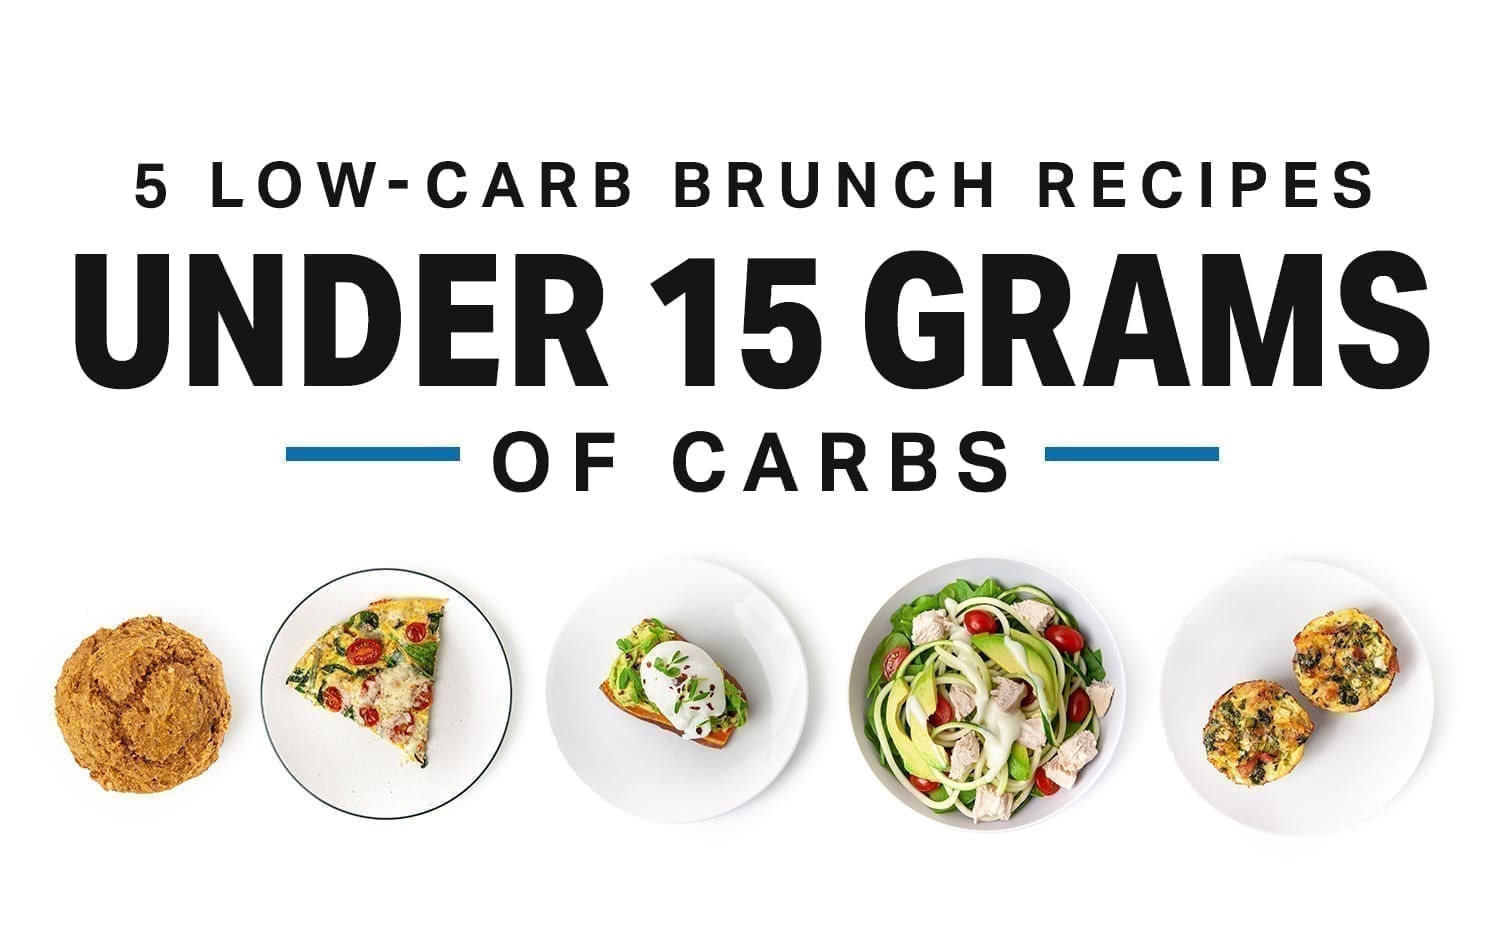 5 Low-Carb Brunch Recipes Under 15 Grams of Carbs